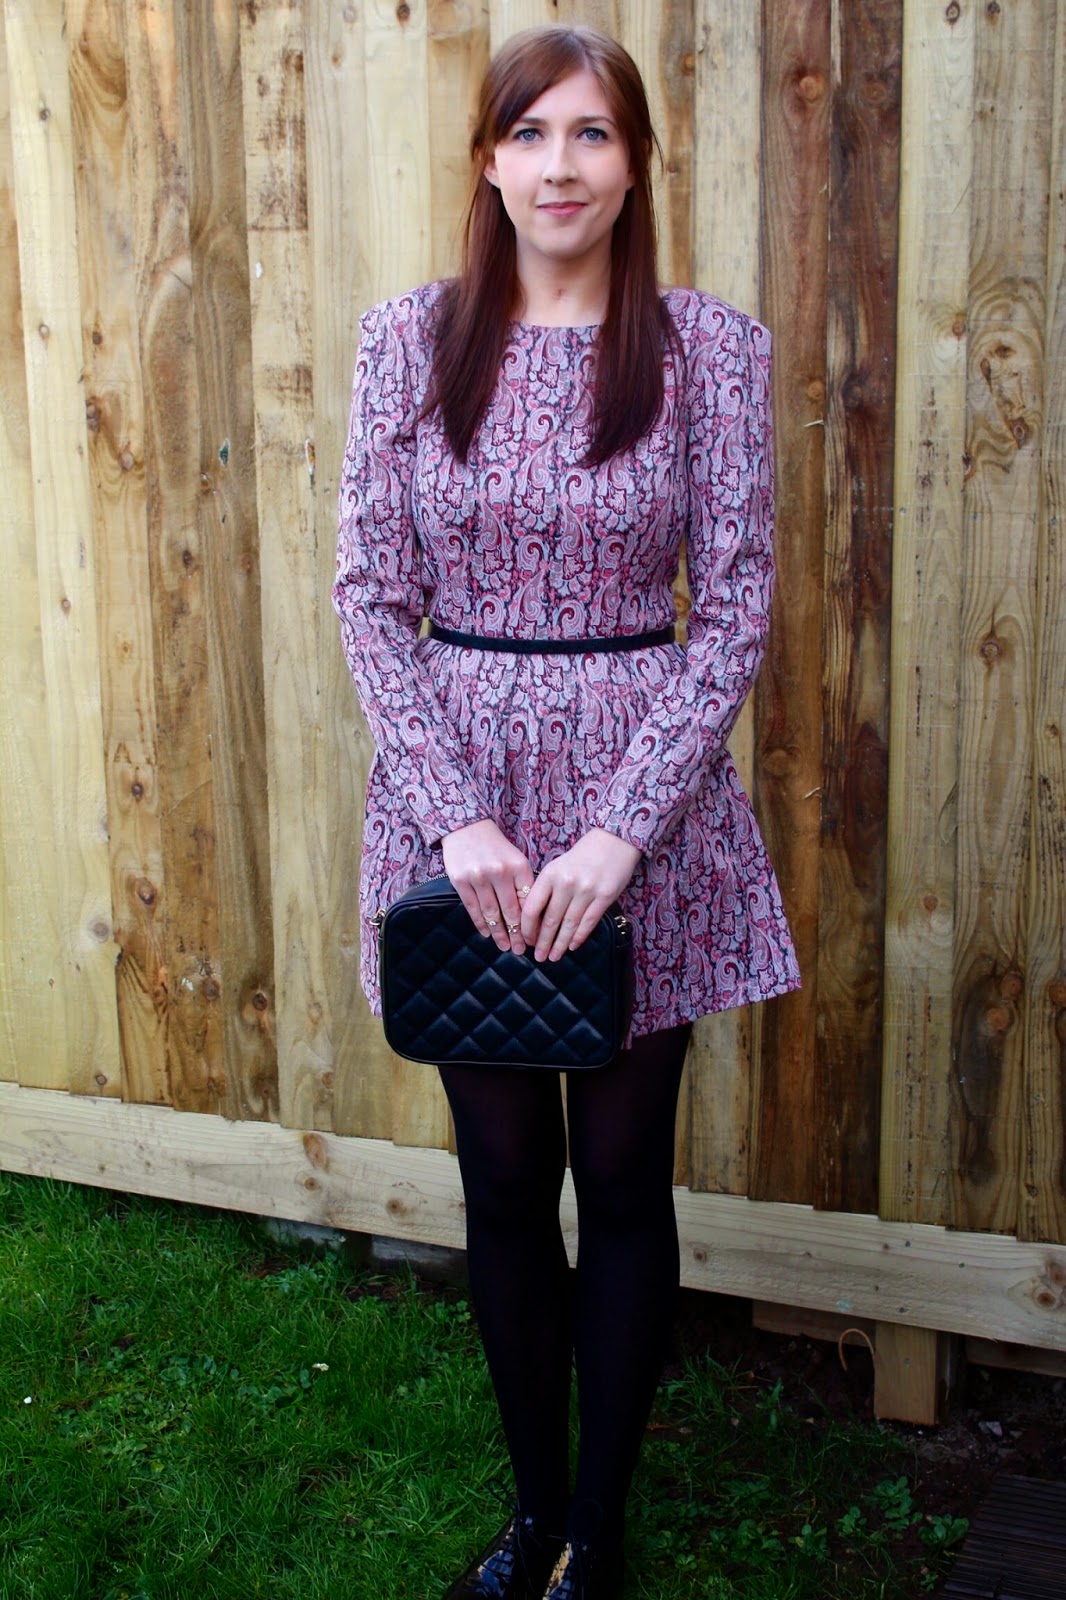 asseenonme, asos, primark, paisley, fbloggers, fashion, fashionbloggers, wiw, whatimwearing, ootd, outfitoftheday, lotd, lookoftheday, primarkdress, paisleydress, brogues, partylook